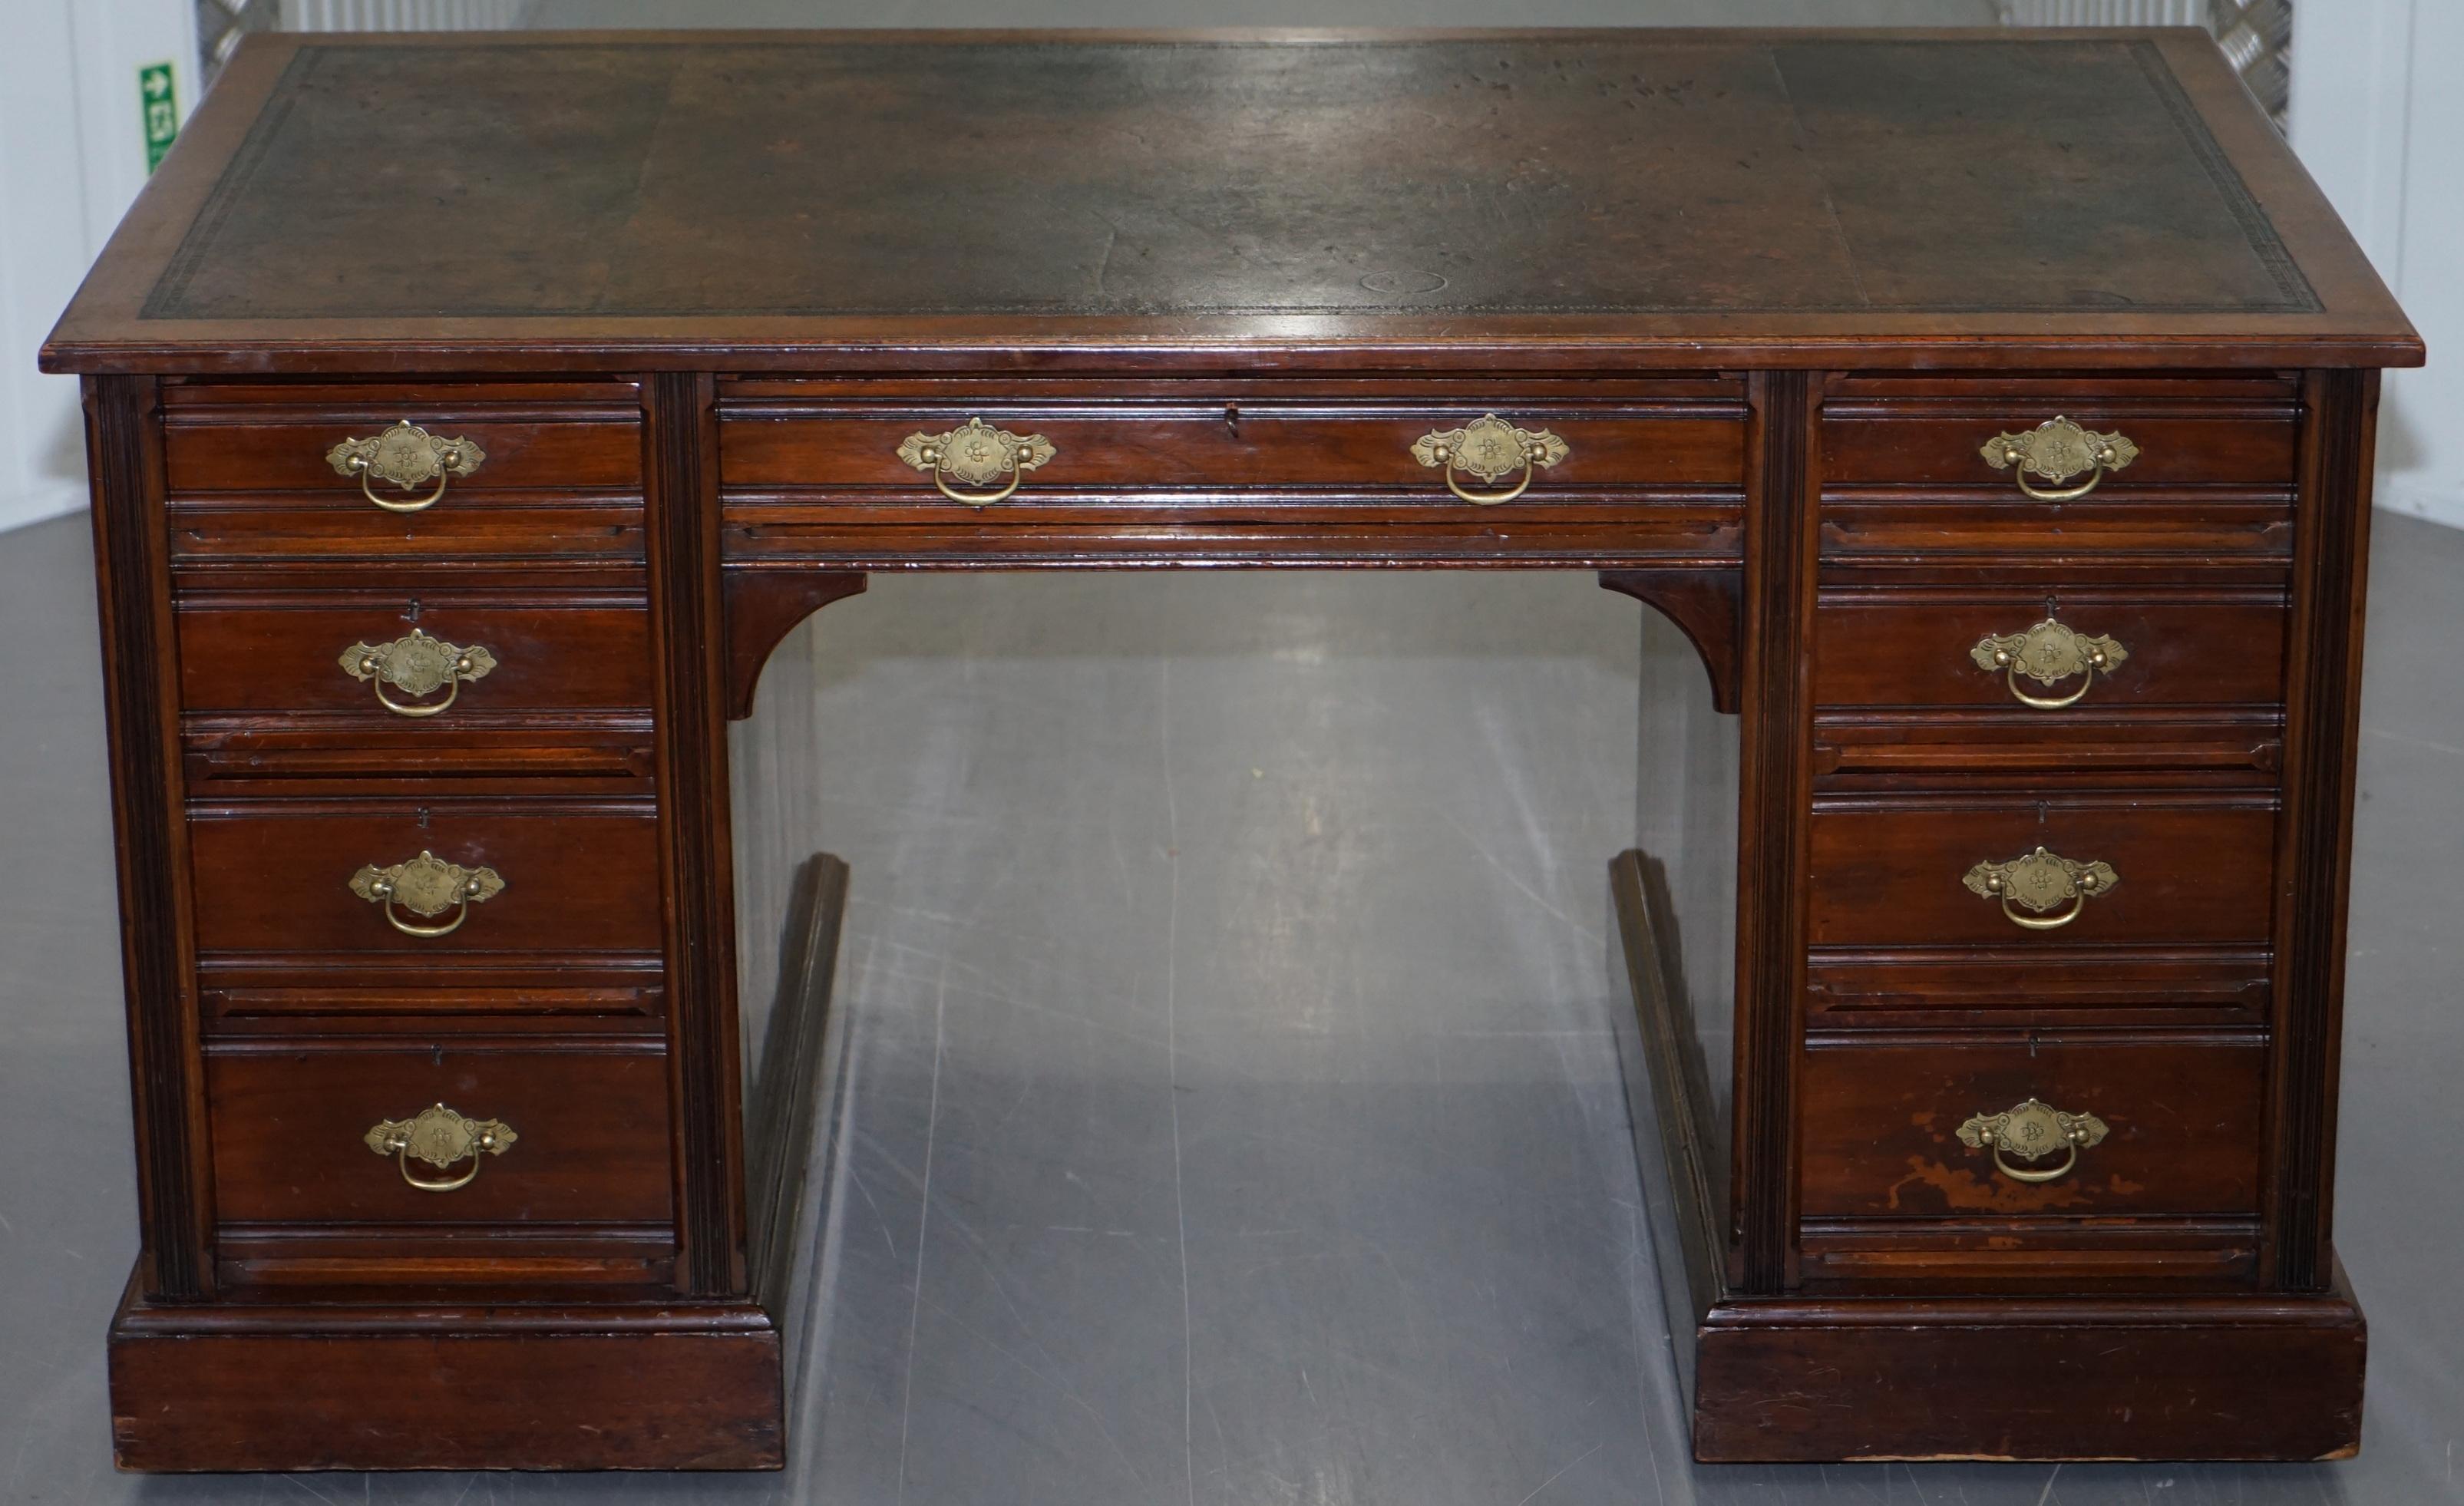 We are delighted to offer for sale this very rare Hampton & Son’s Pall Mall Victorian, circa 1870 twin pedestal partner writing desk

A very good looking well-made mahogany desk with a leather top made by the highly coveted Hampton & Son’s

The